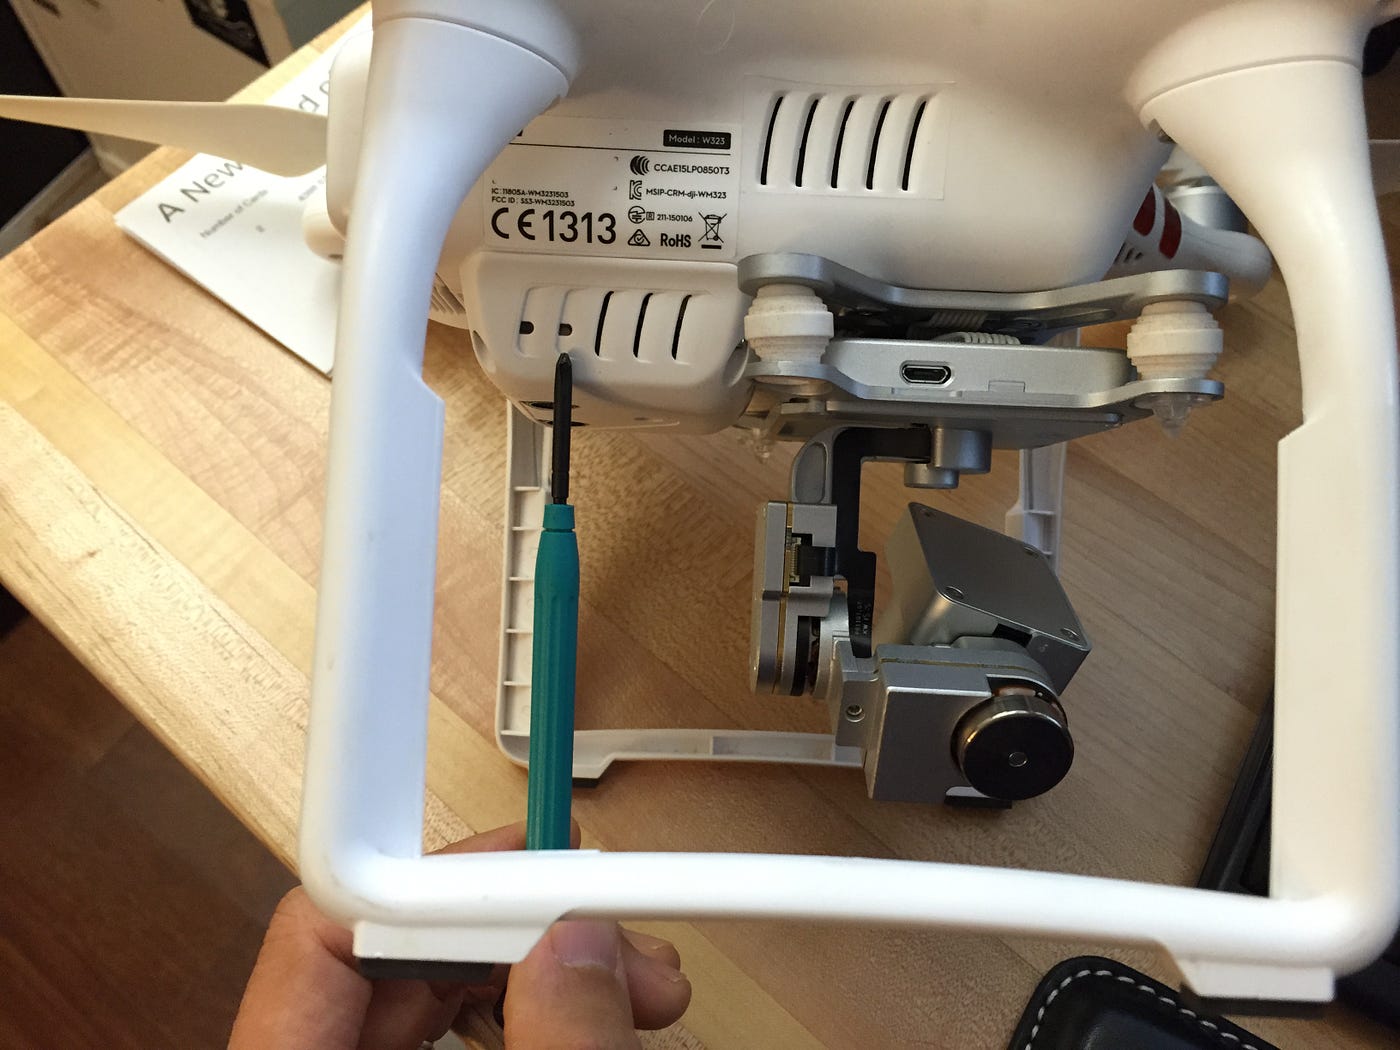 How to bind / link a DJI Phantom 3 to its remote controller | by Eric Cheng  | Medium